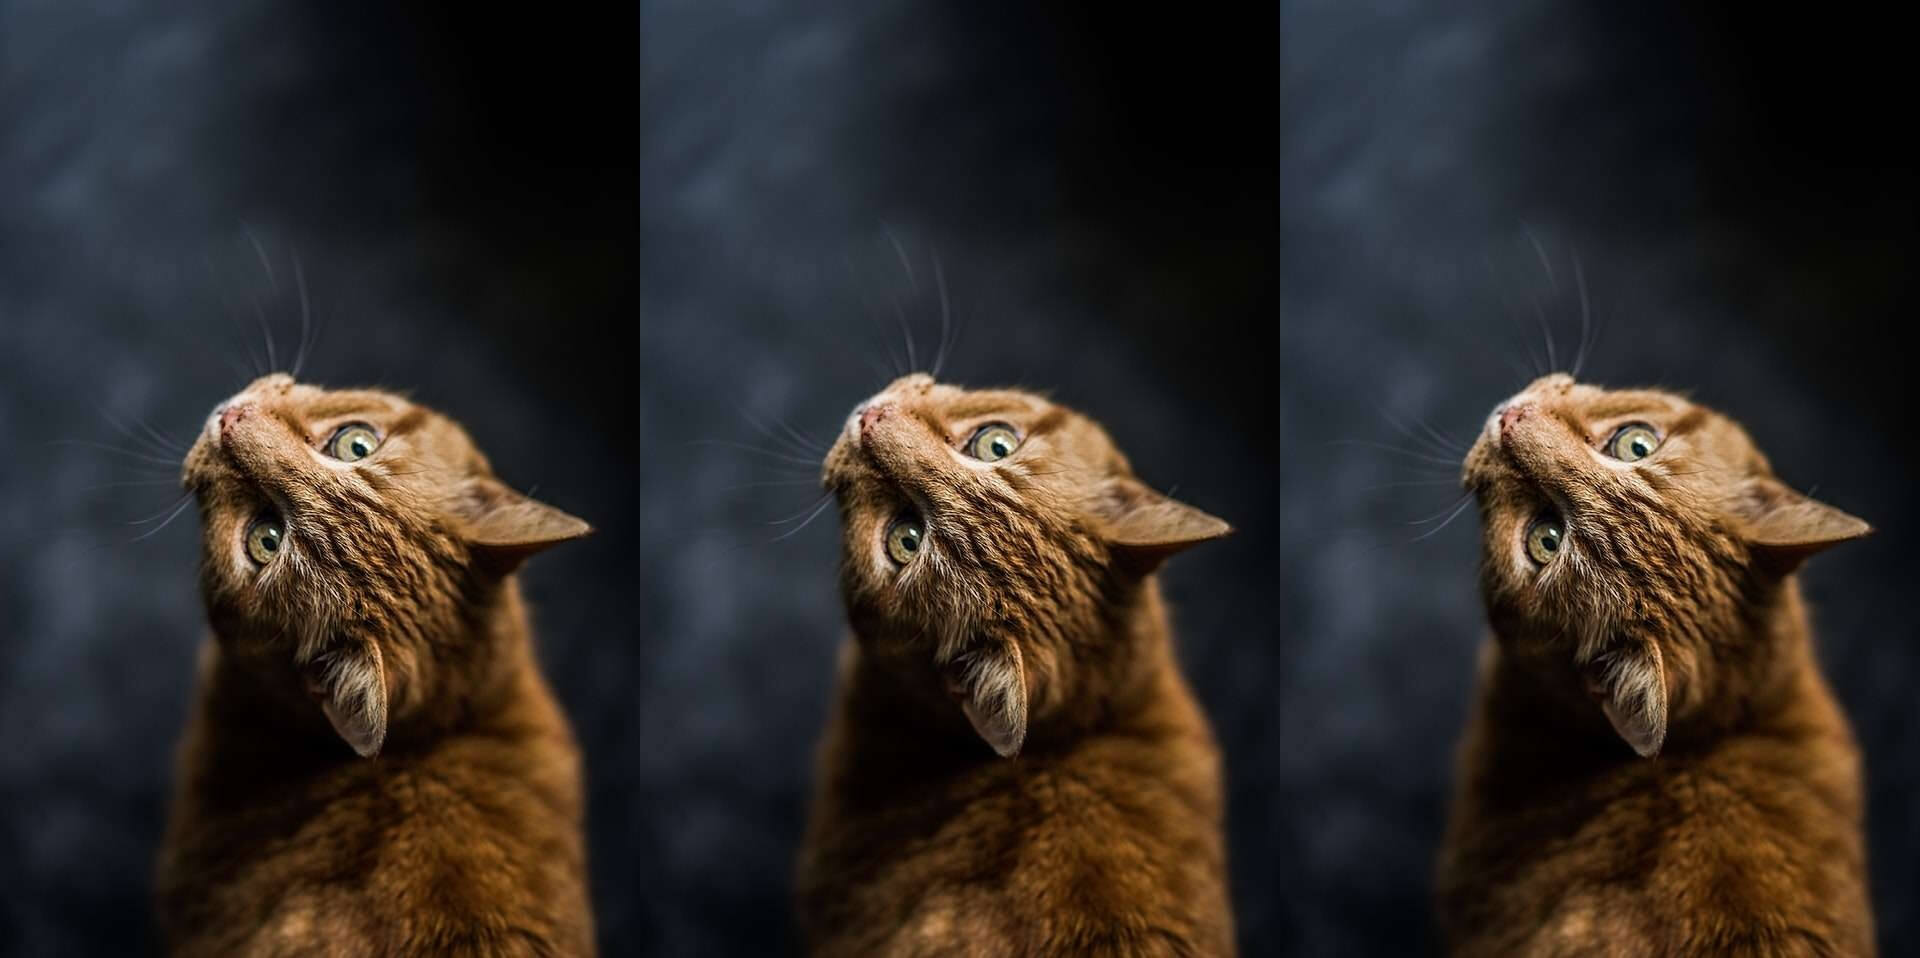 In this example we horizontally duplicate a JPEG image of a ginger cat three times.